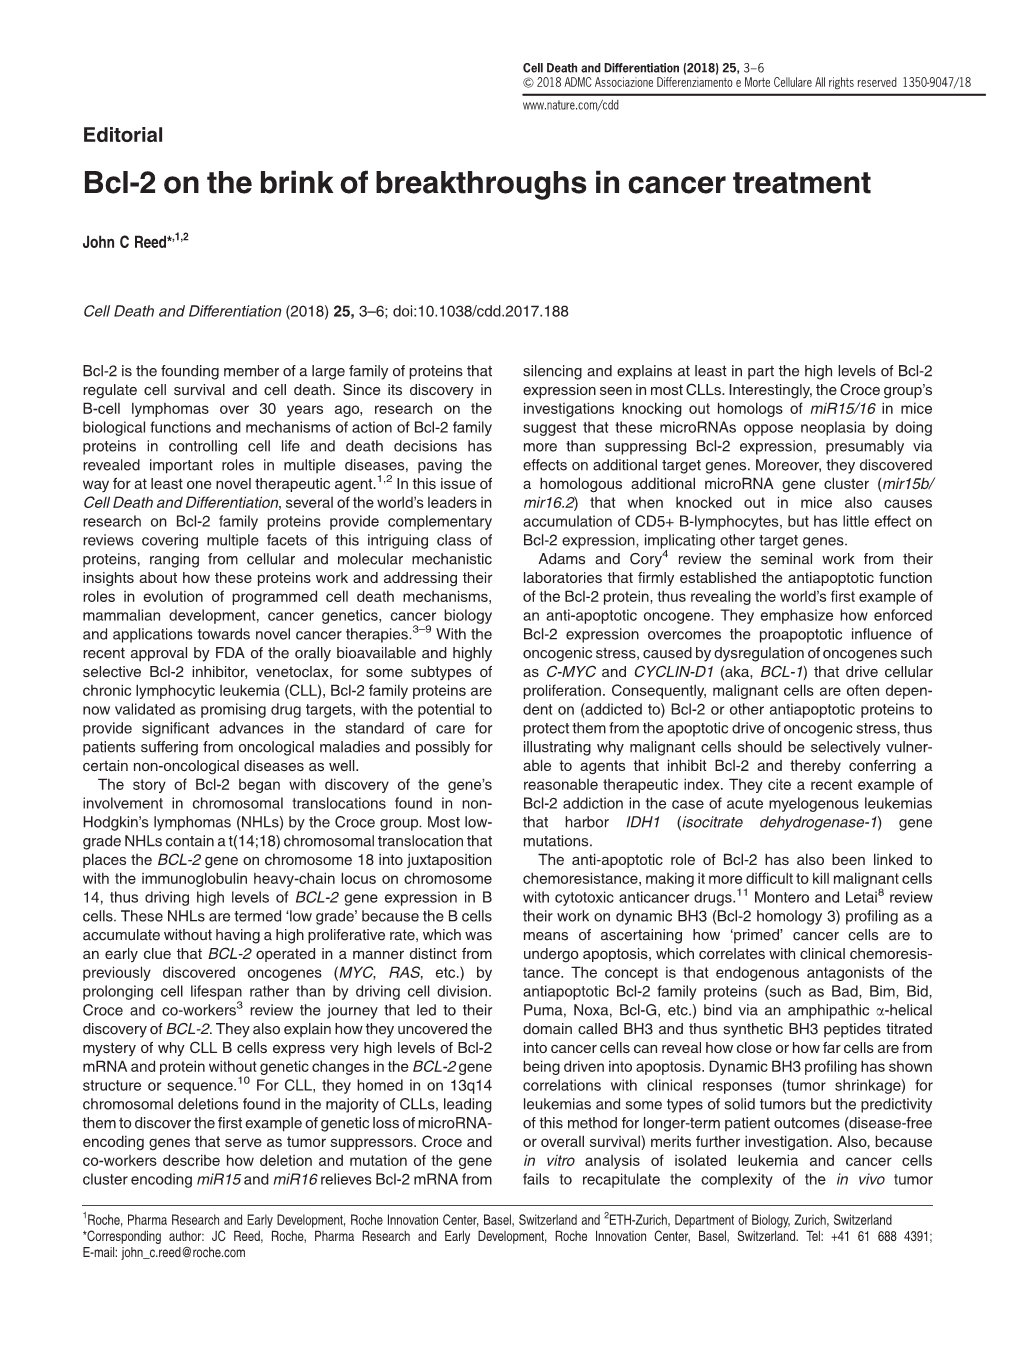 Bcl-2 on the Brink of Breakthroughs in Cancer Treatment